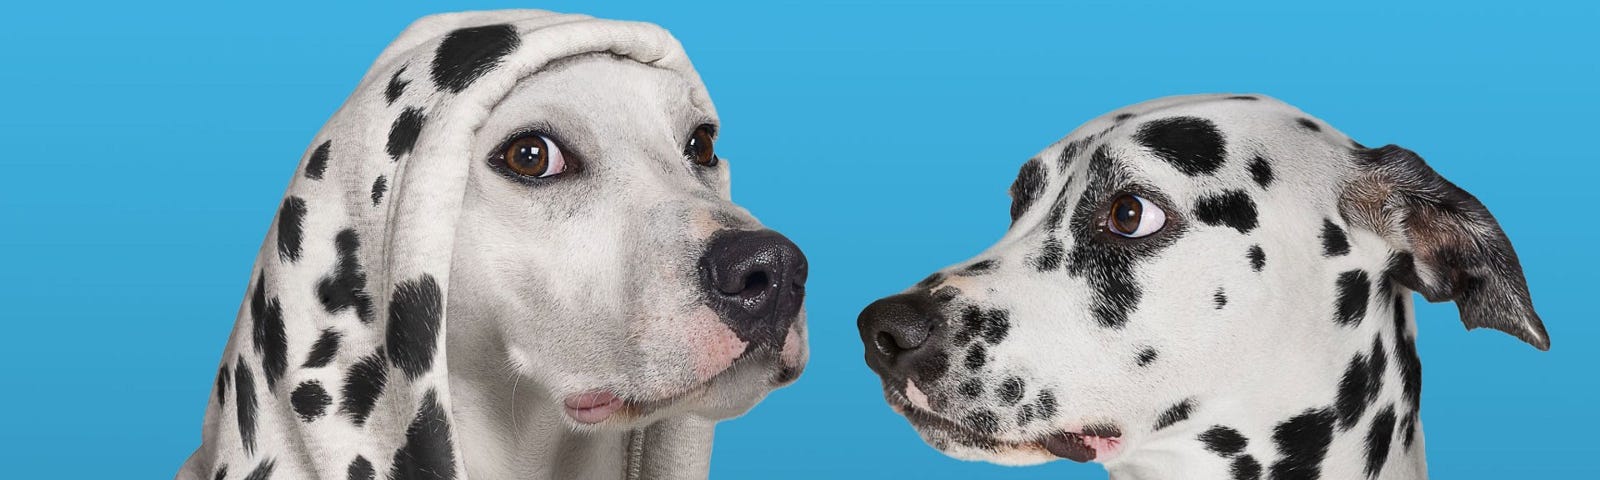 A spotted Dalmatian looks at a white dog in a hoodie with Dalmatian spots.